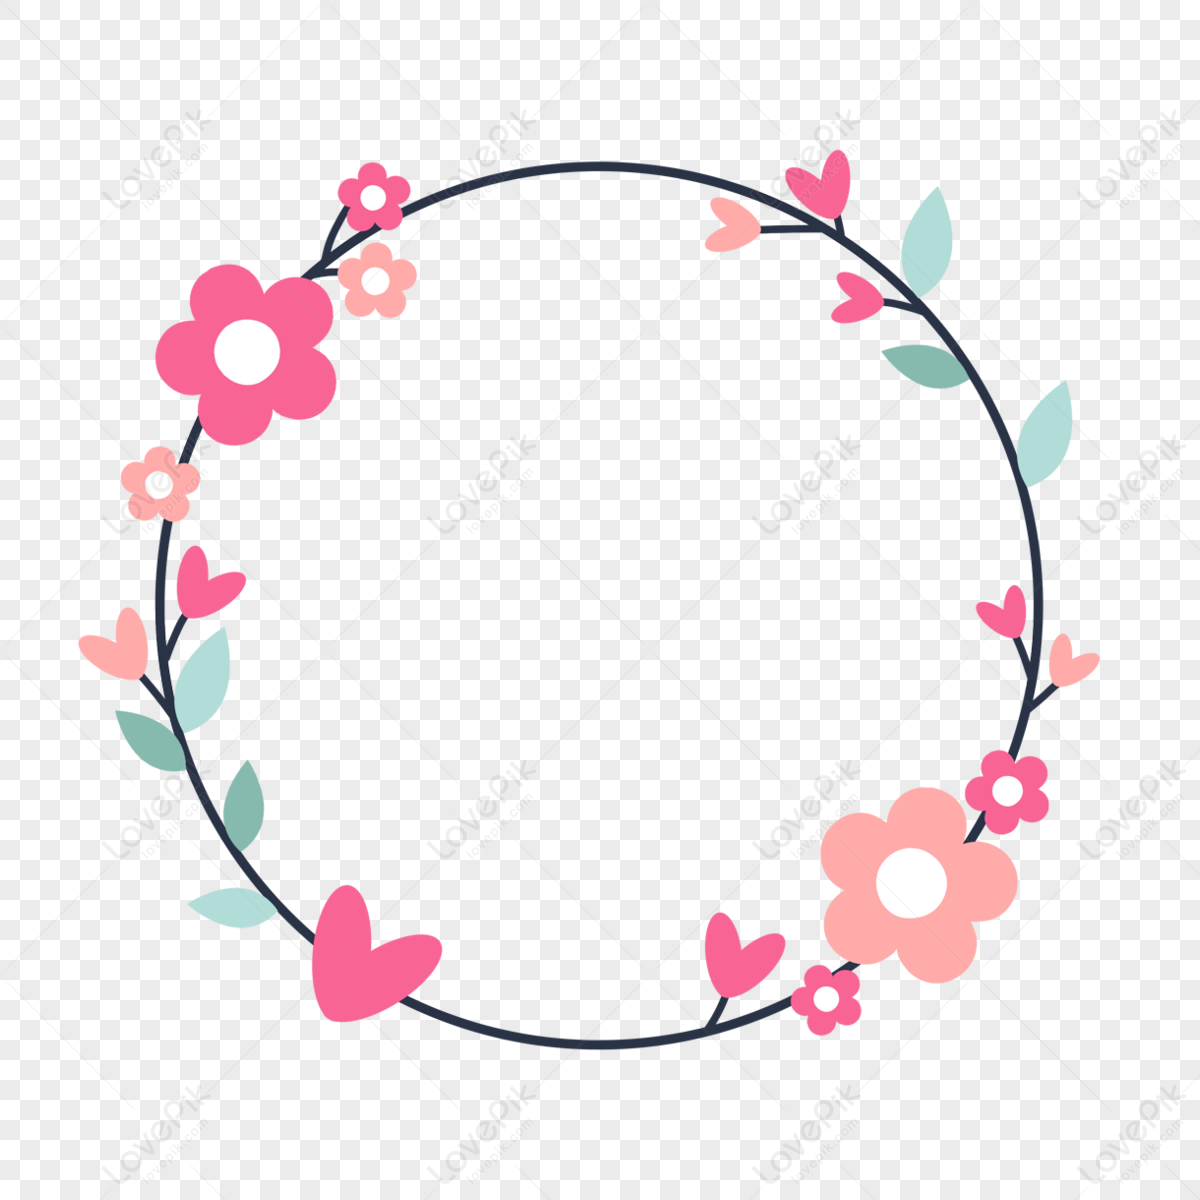 Circular Composition Png Images With Transparent Background 